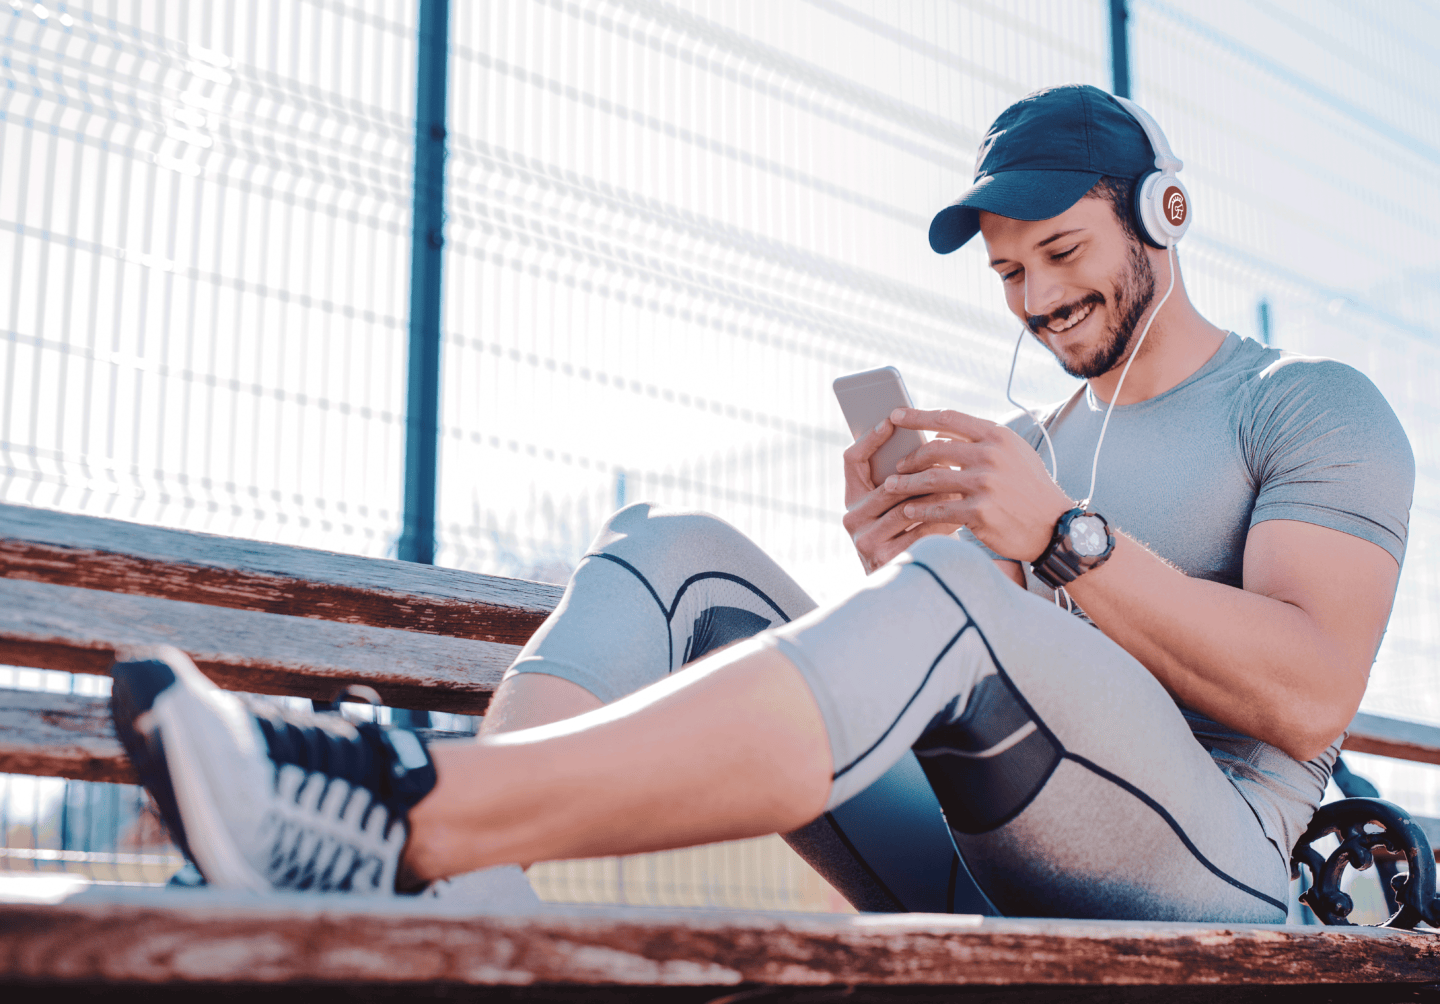 A man wearing athletic clothes smiles at his phone while wearing Safeguard by Innovative branded headphones.